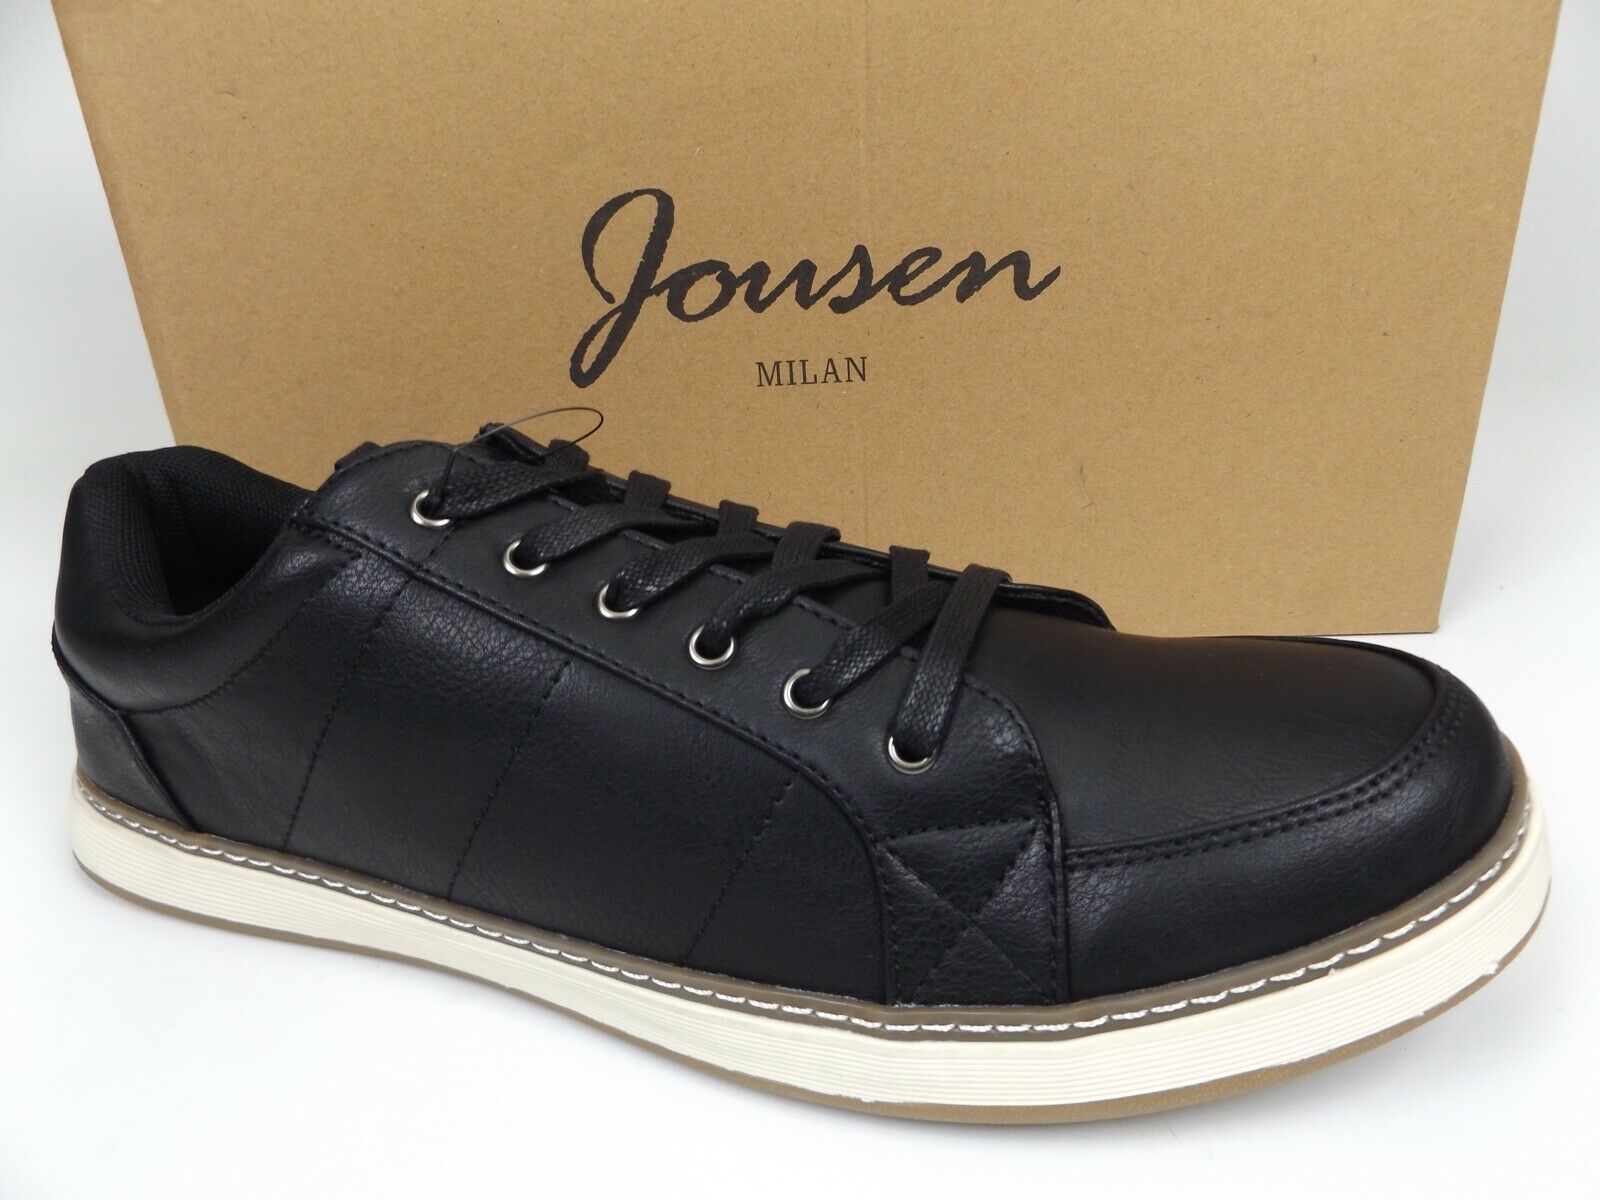 JOUSEN Mens Leather Sneakers Fashion Sneaker Casual Shoes Size 11.5 M, Blk 21109